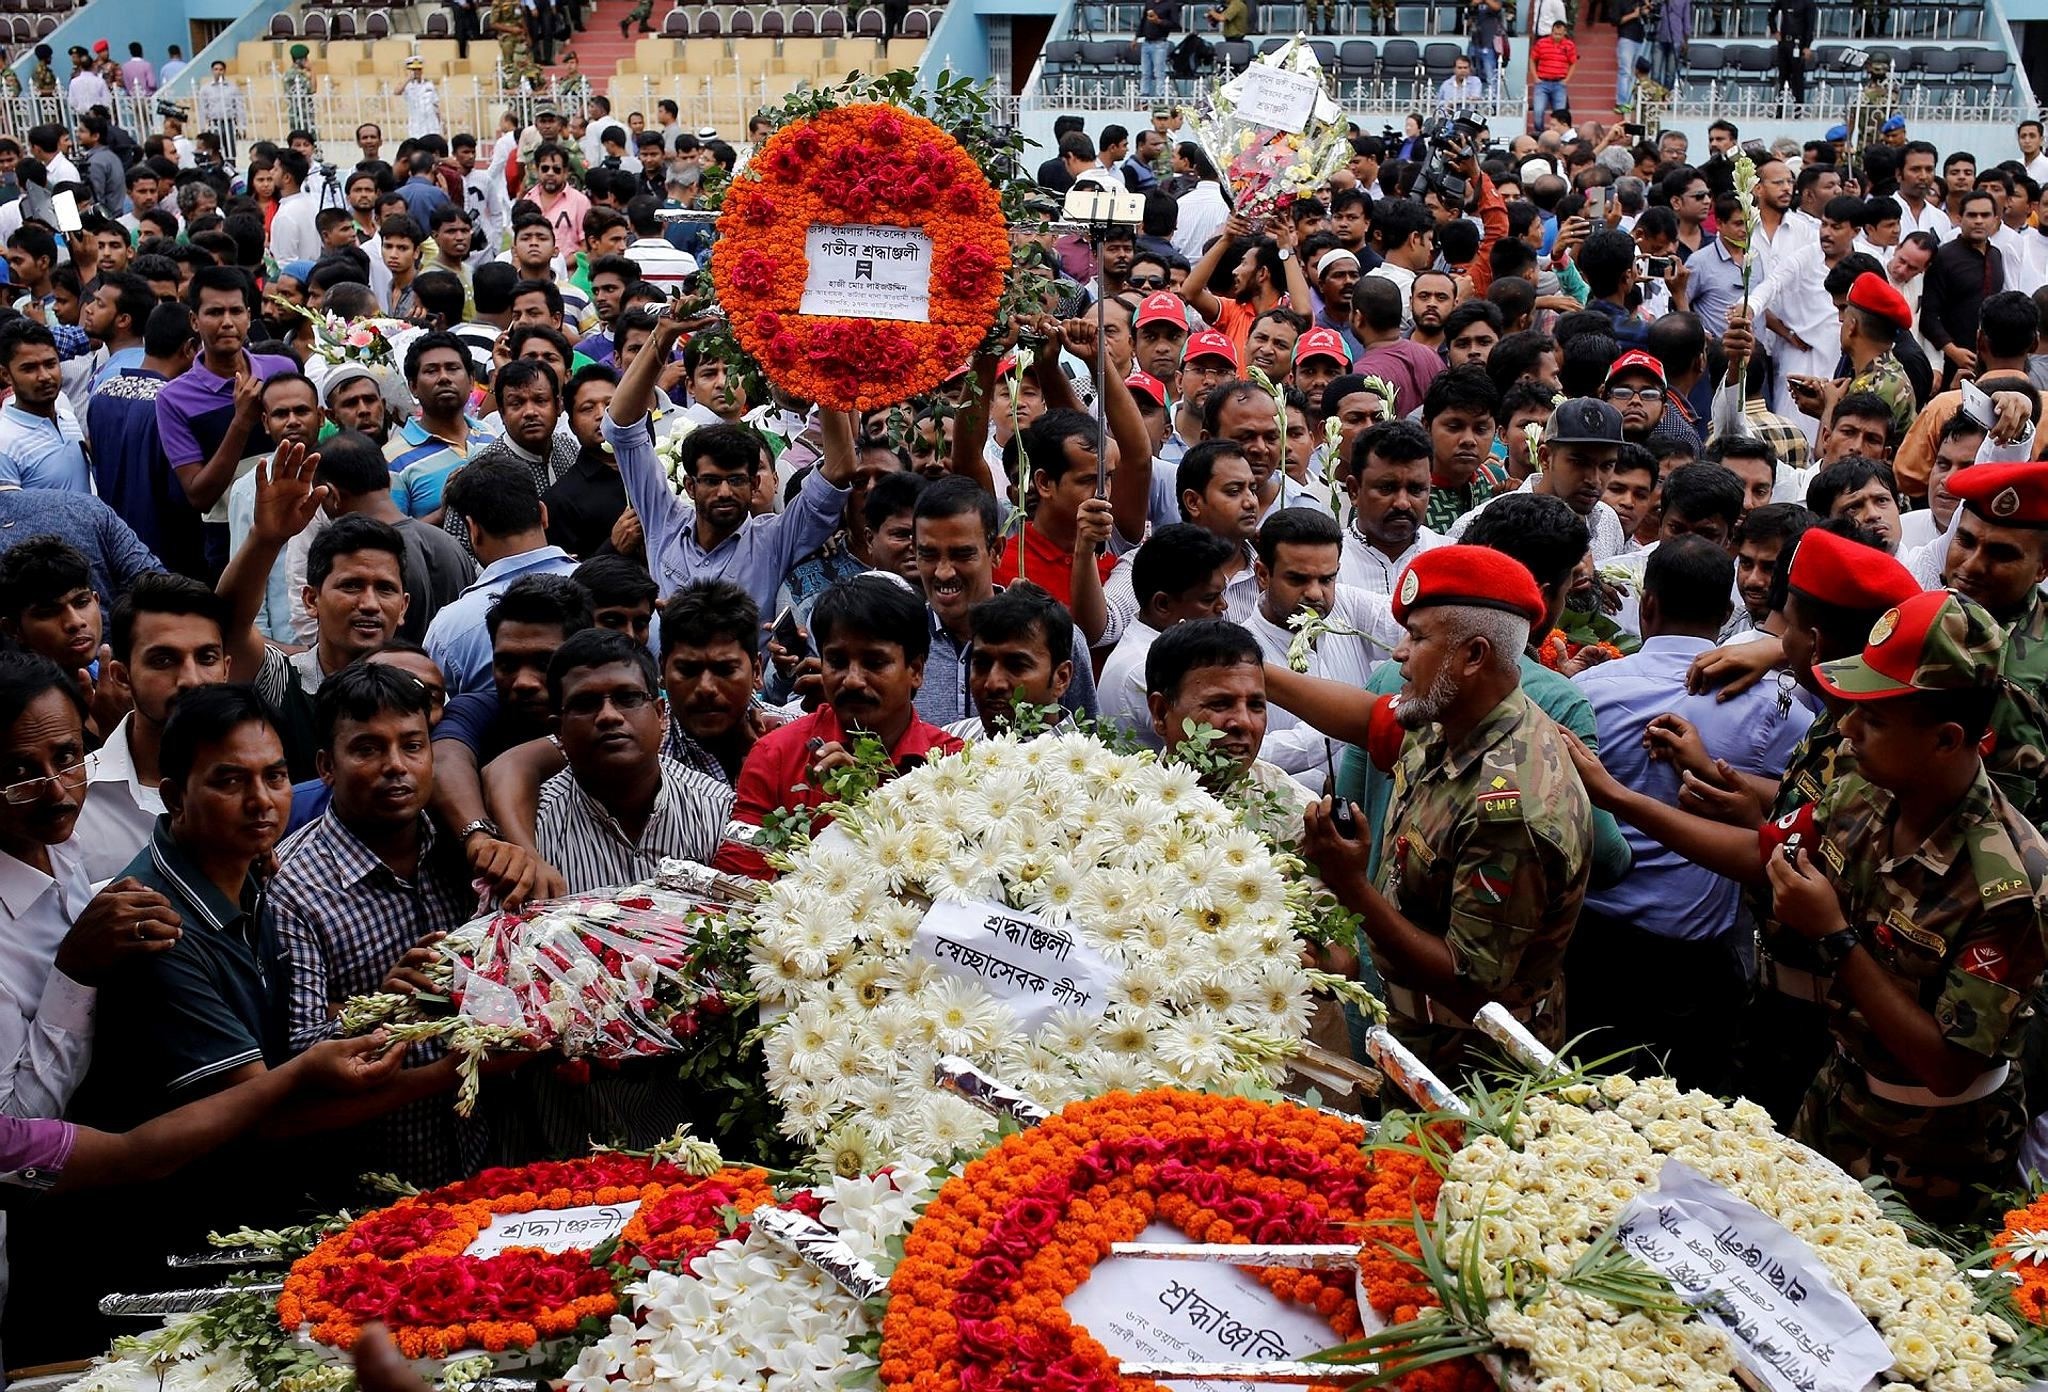 People pay tribute to the victims of the attack on the Holey Artisan Bakery and the O'Kitchen Restaurant, in Dhaka Bangladesh, July 4, 2016. (REUTERS Photo)